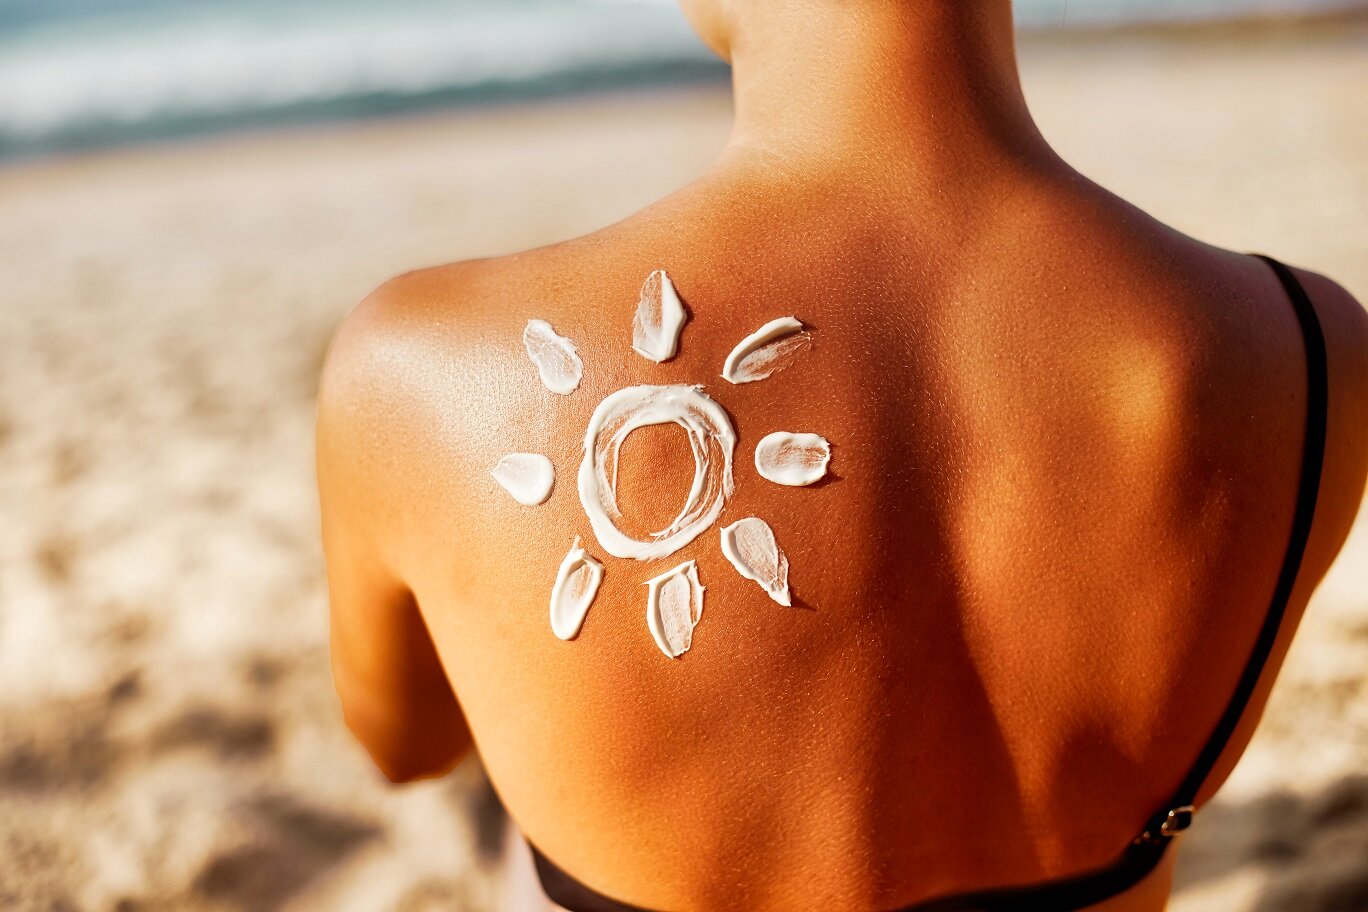 Eighty years ago, when sun exposure was first associated with skin cancer, ...